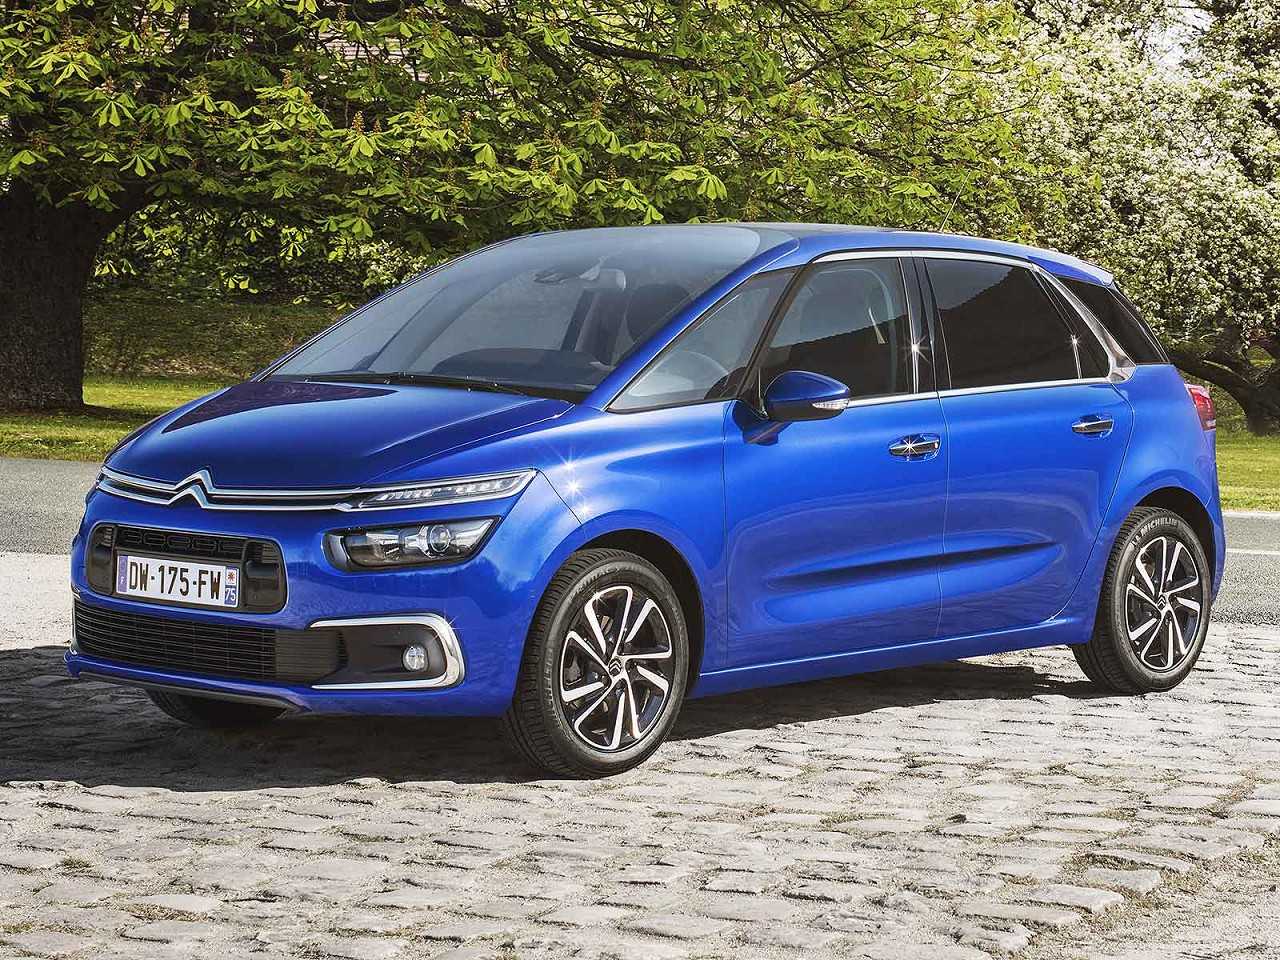 CitronC4 Picasso 2016 - ngulo frontal